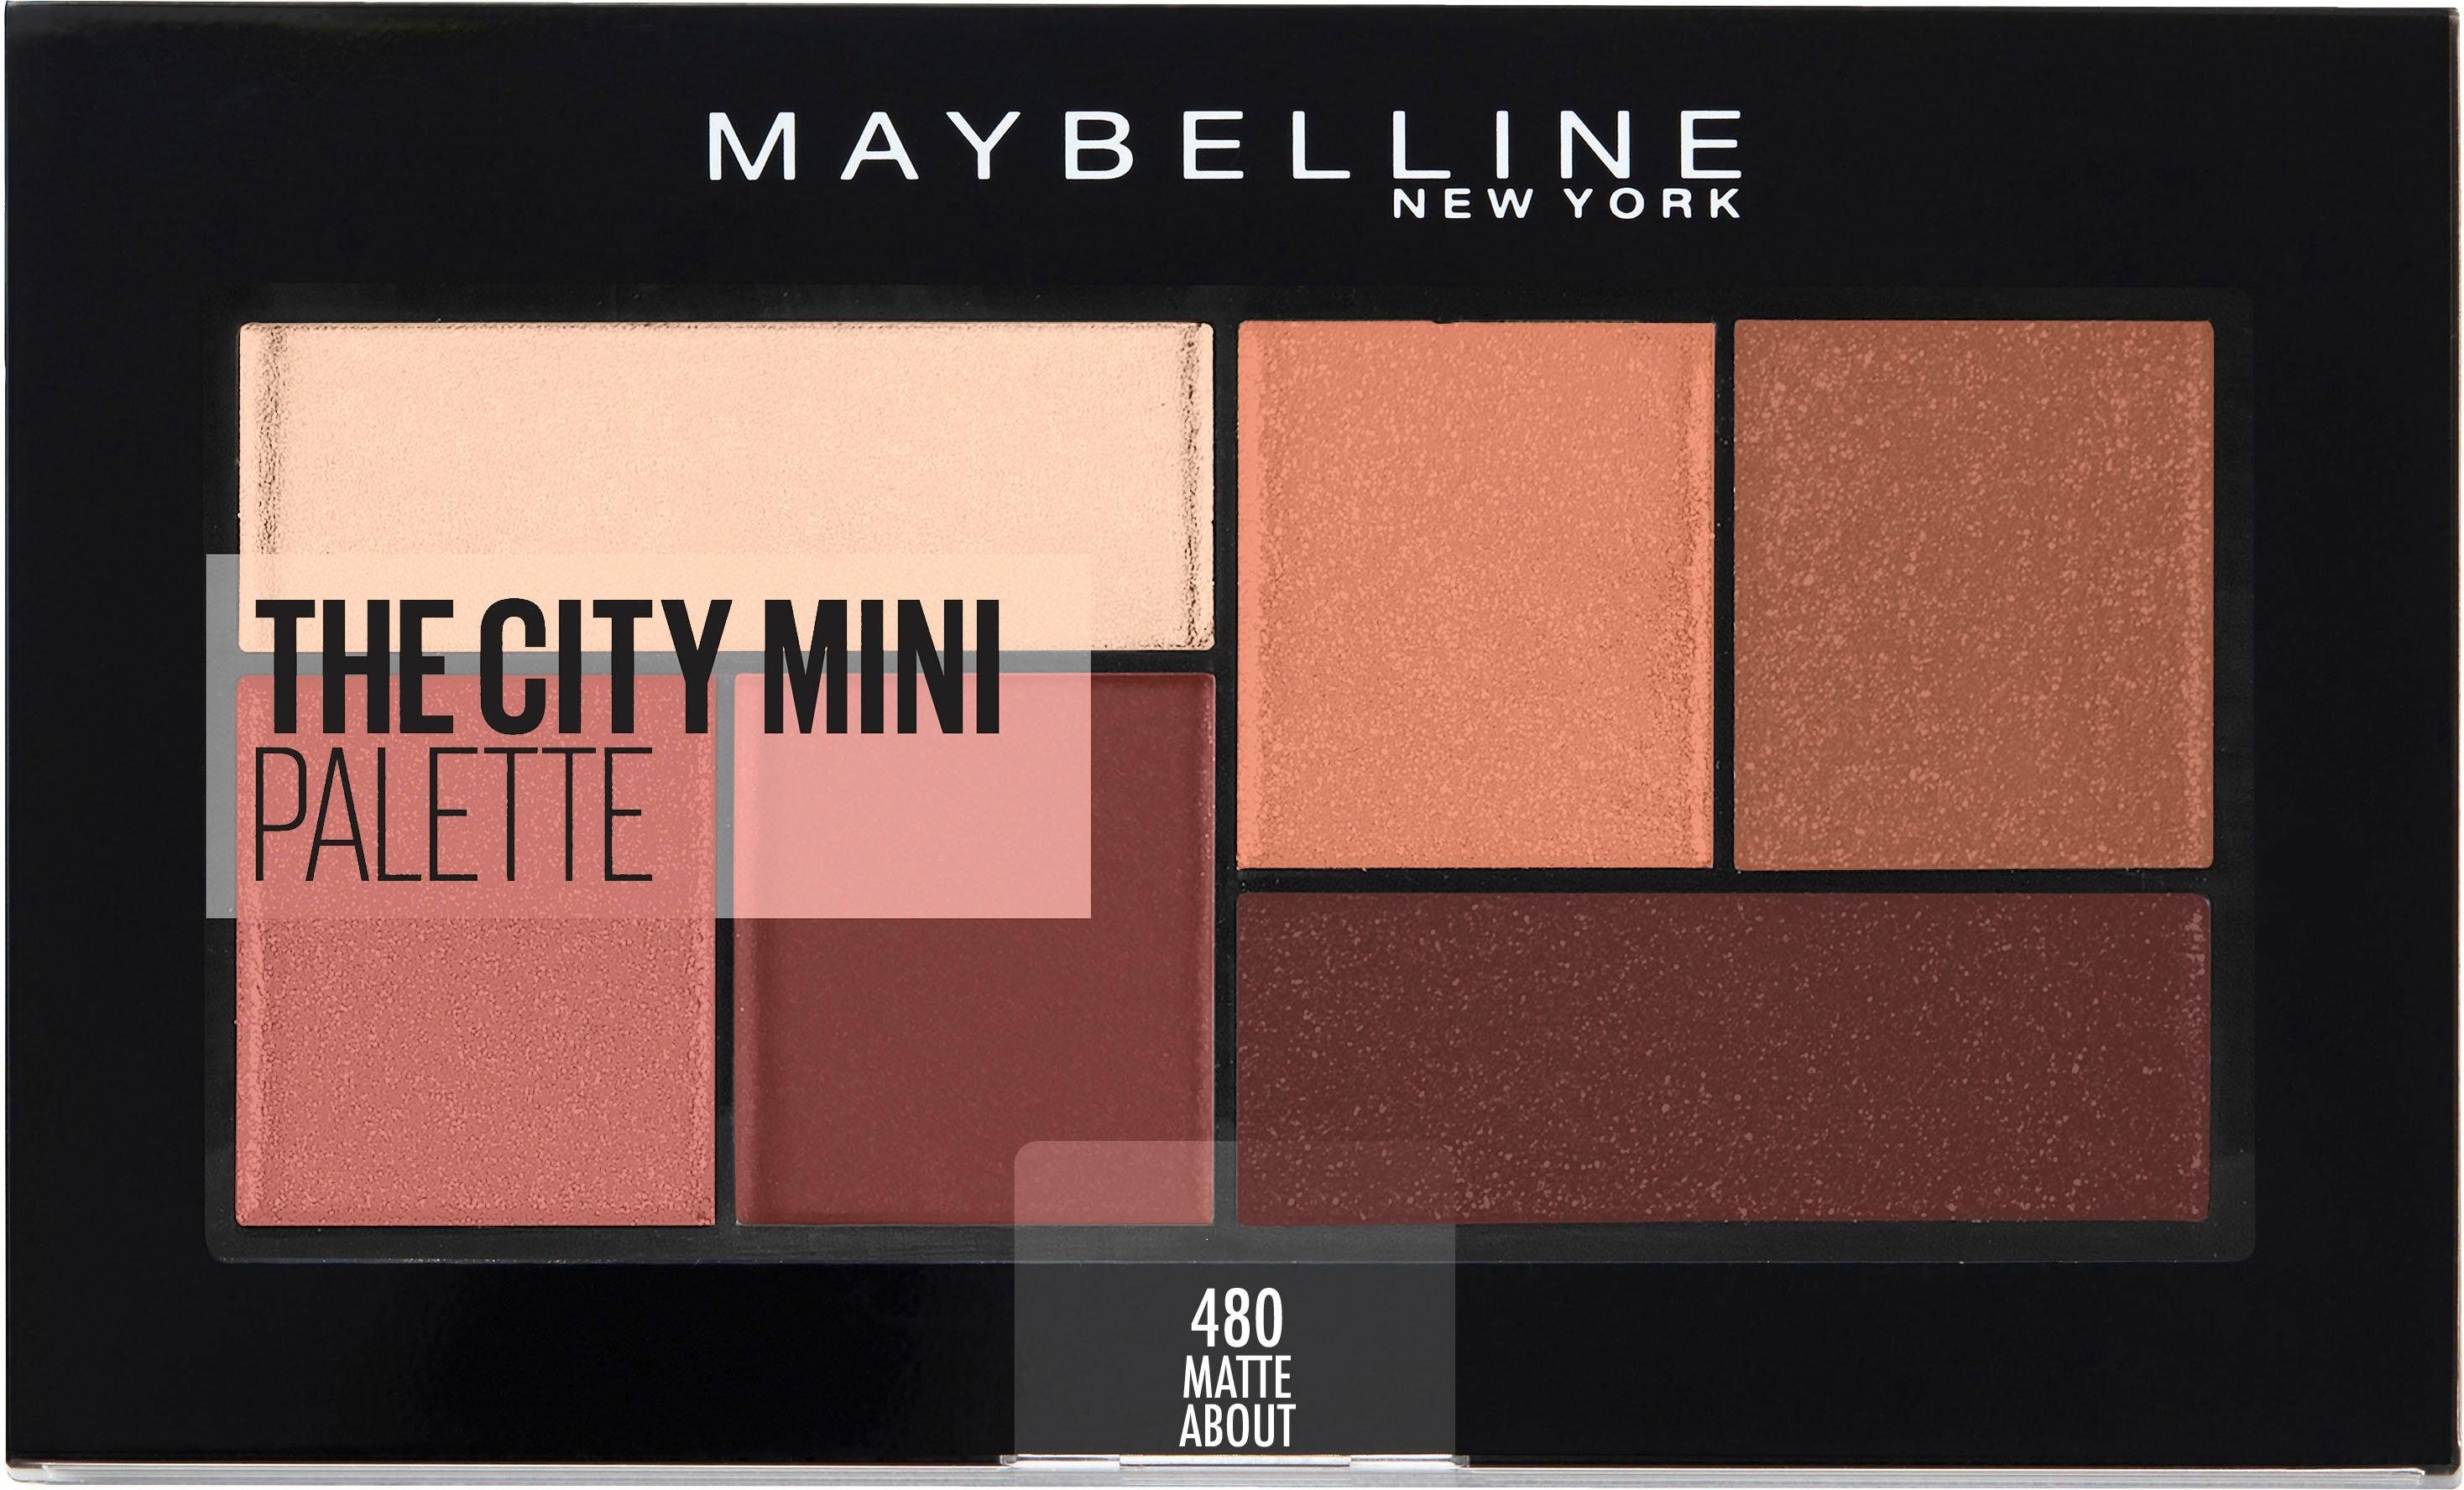 MAYBELLINE NEW Lidschatten-Palette About Mini, YORK Town City The Matte